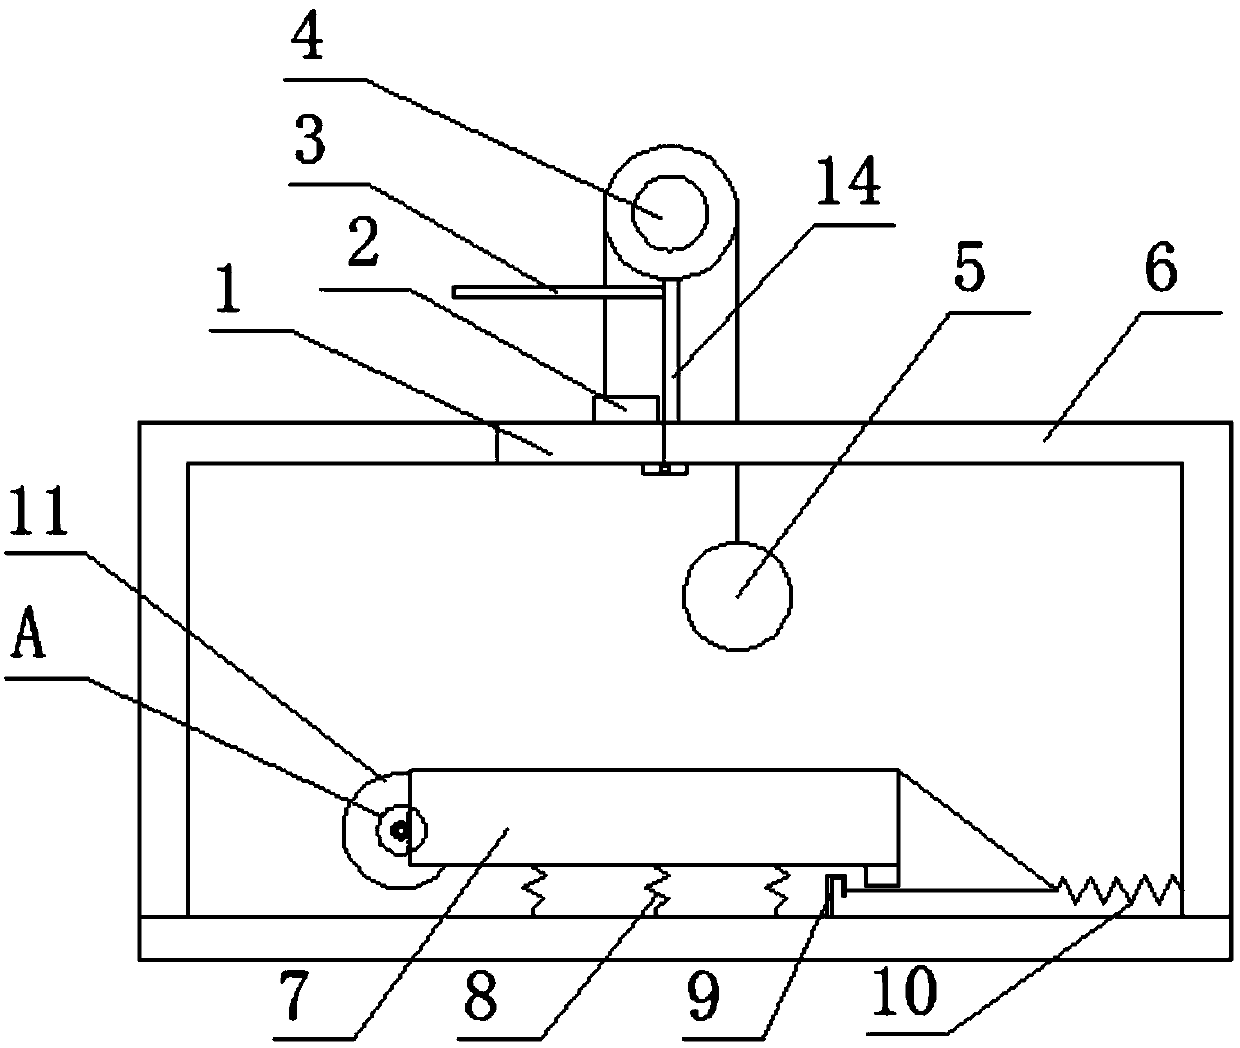 A finished poultry grabbing device with automatic identification function